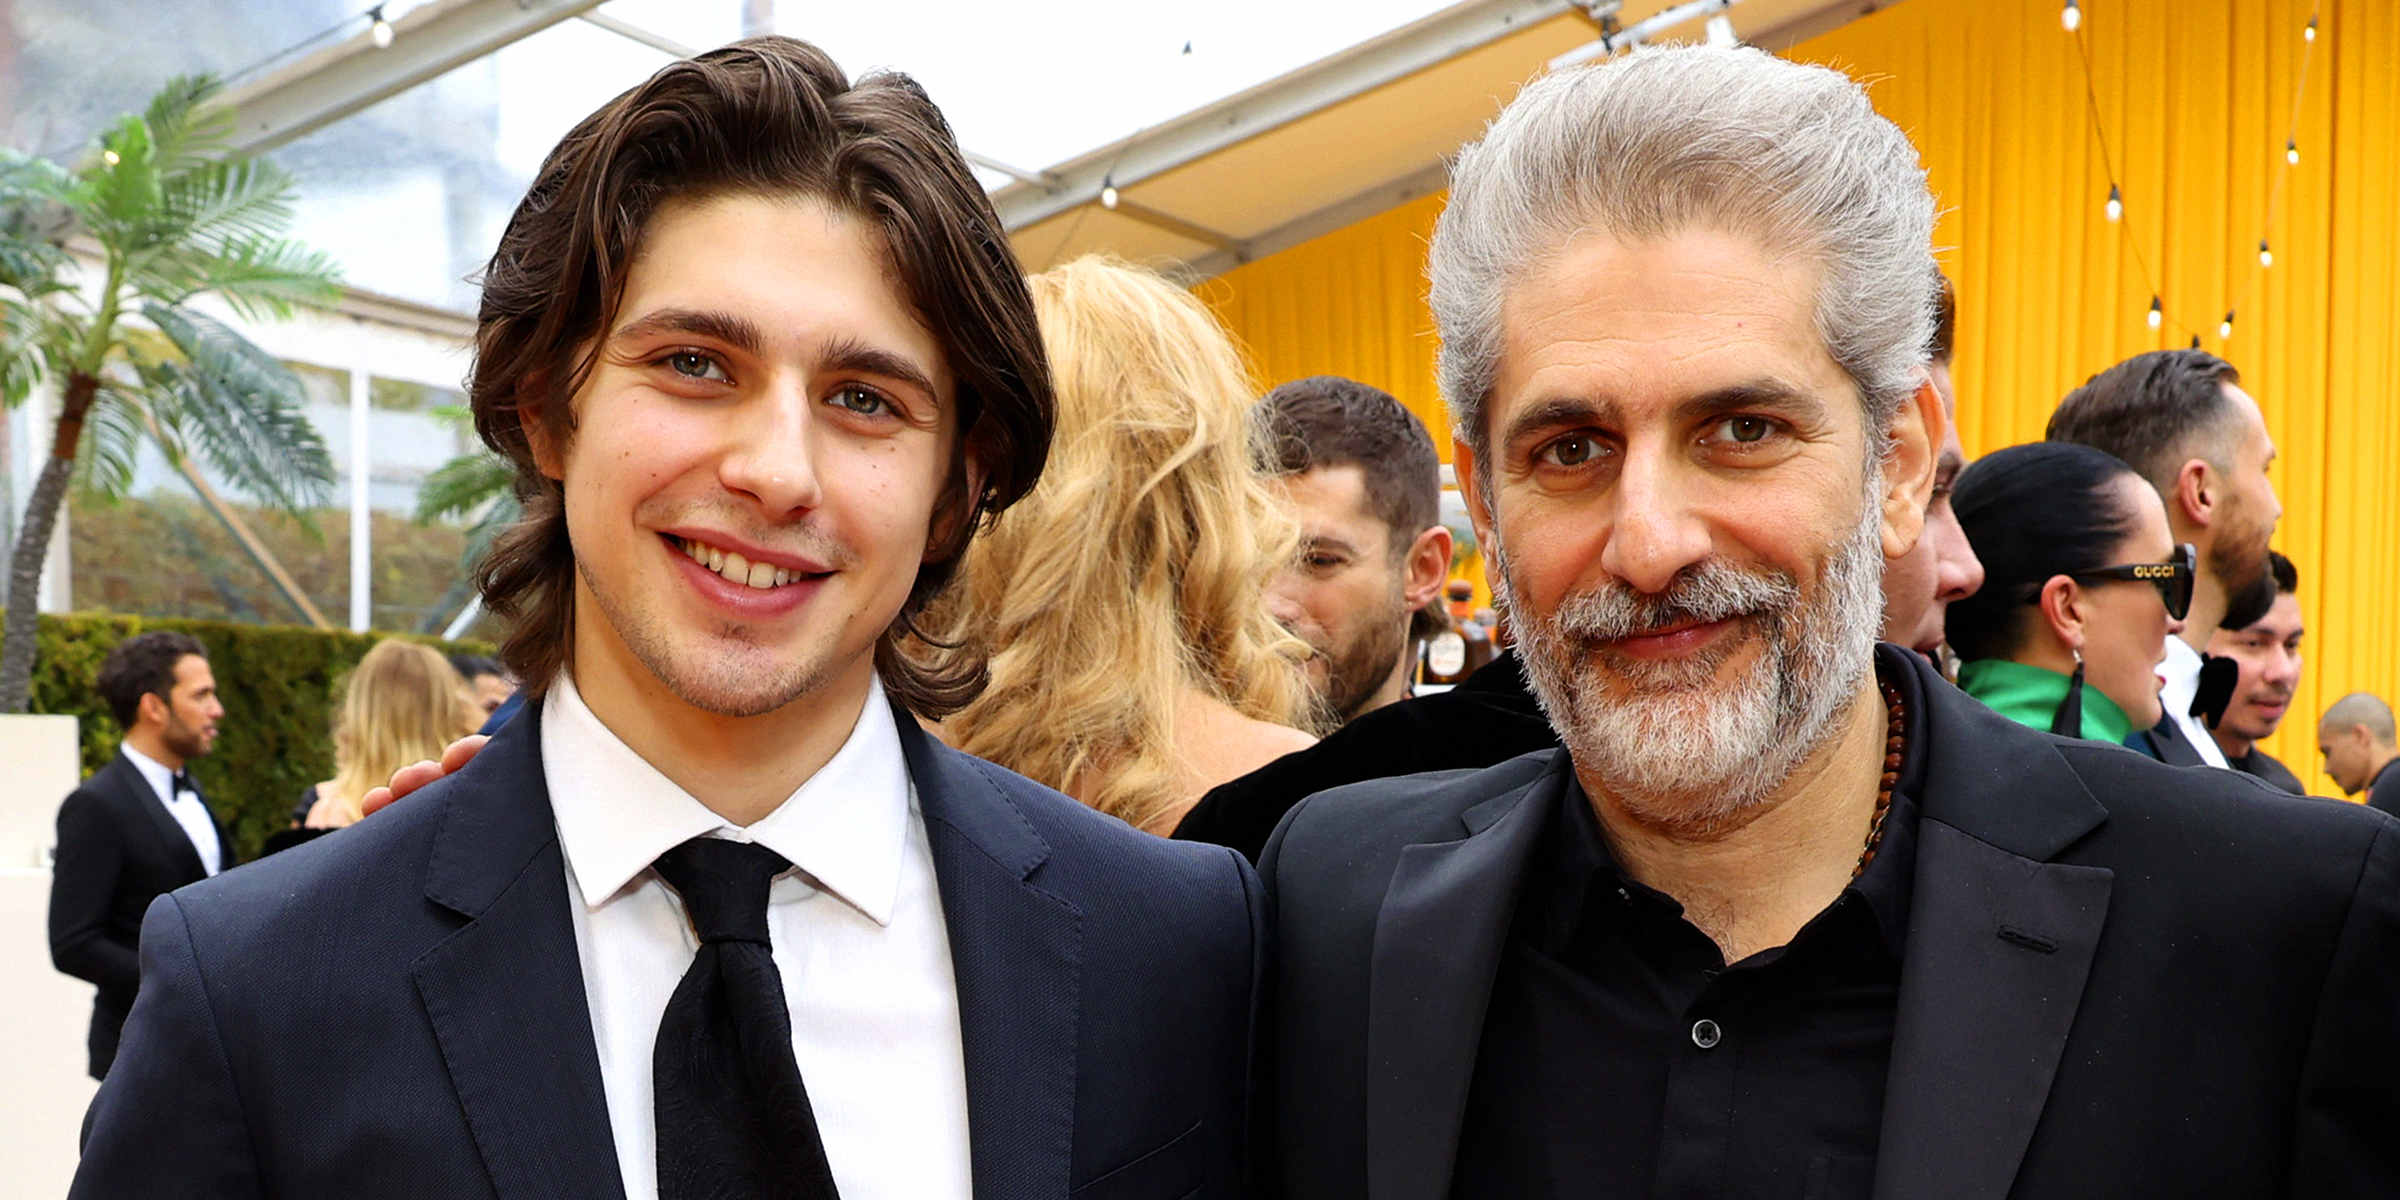 David Imperioli and Michael Imperioli | Source: Getty Images